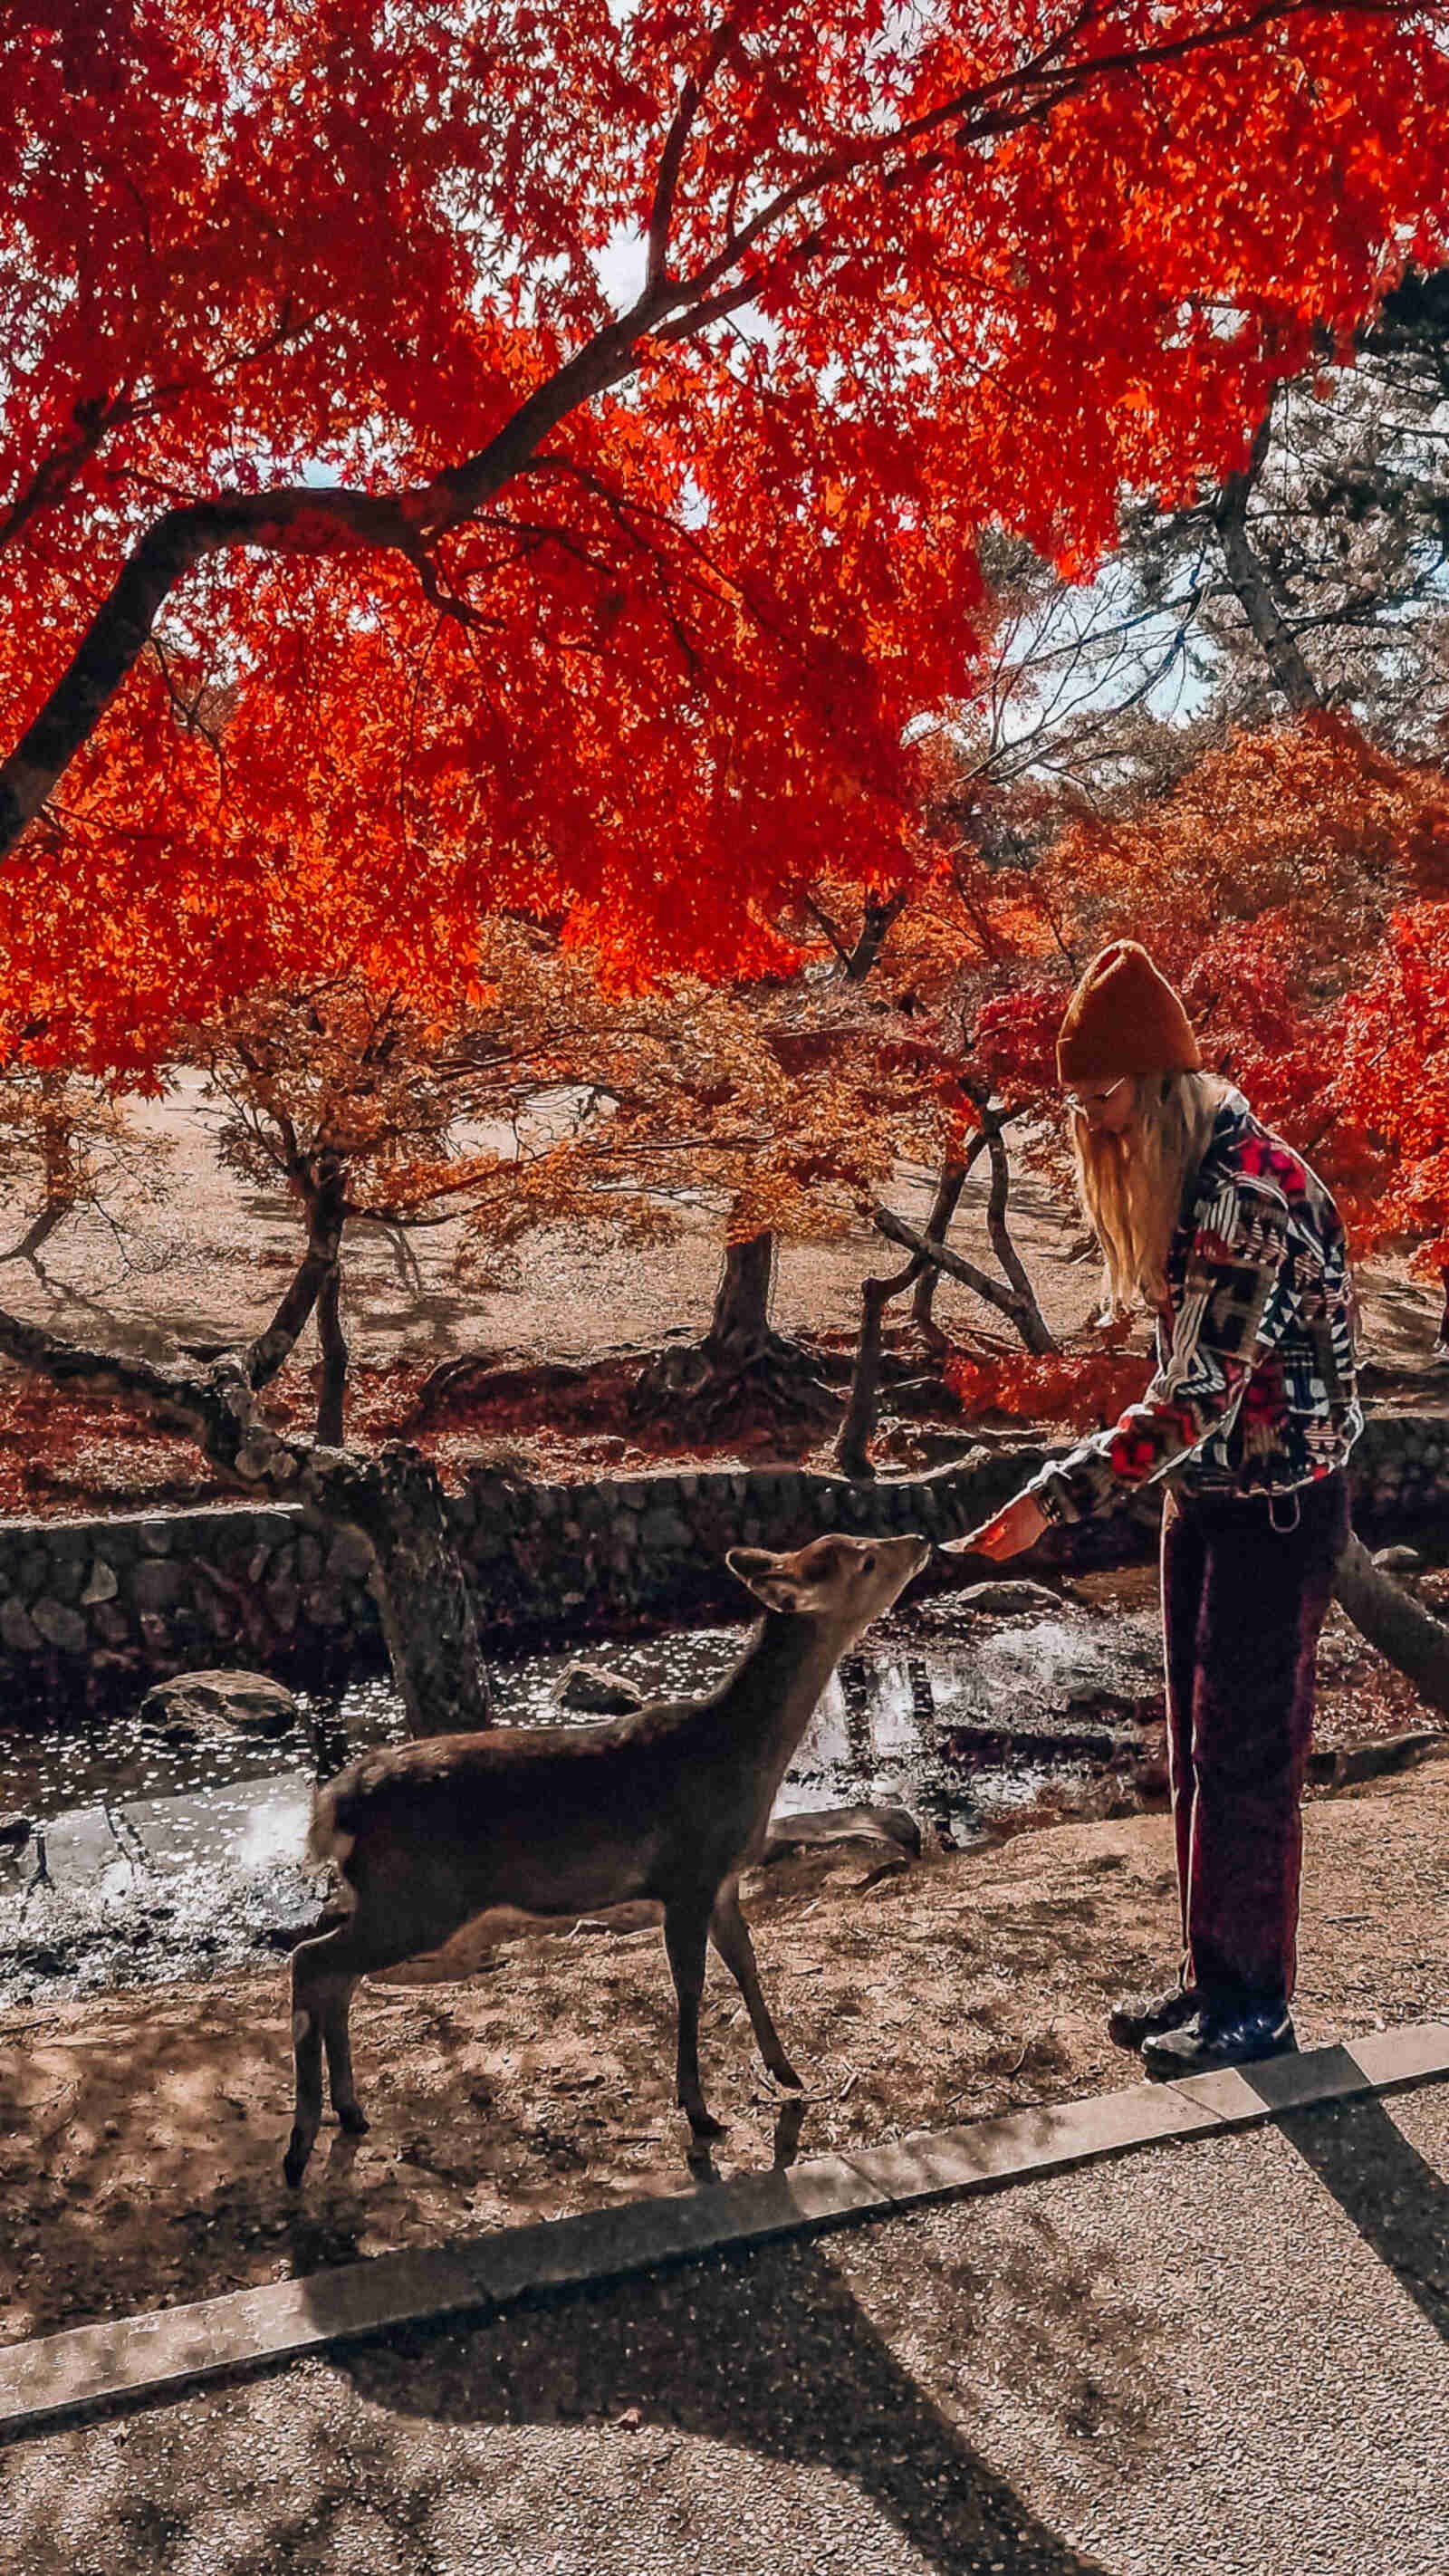 Helena feeding a deer at nara, red autumn leaves and a river next to them